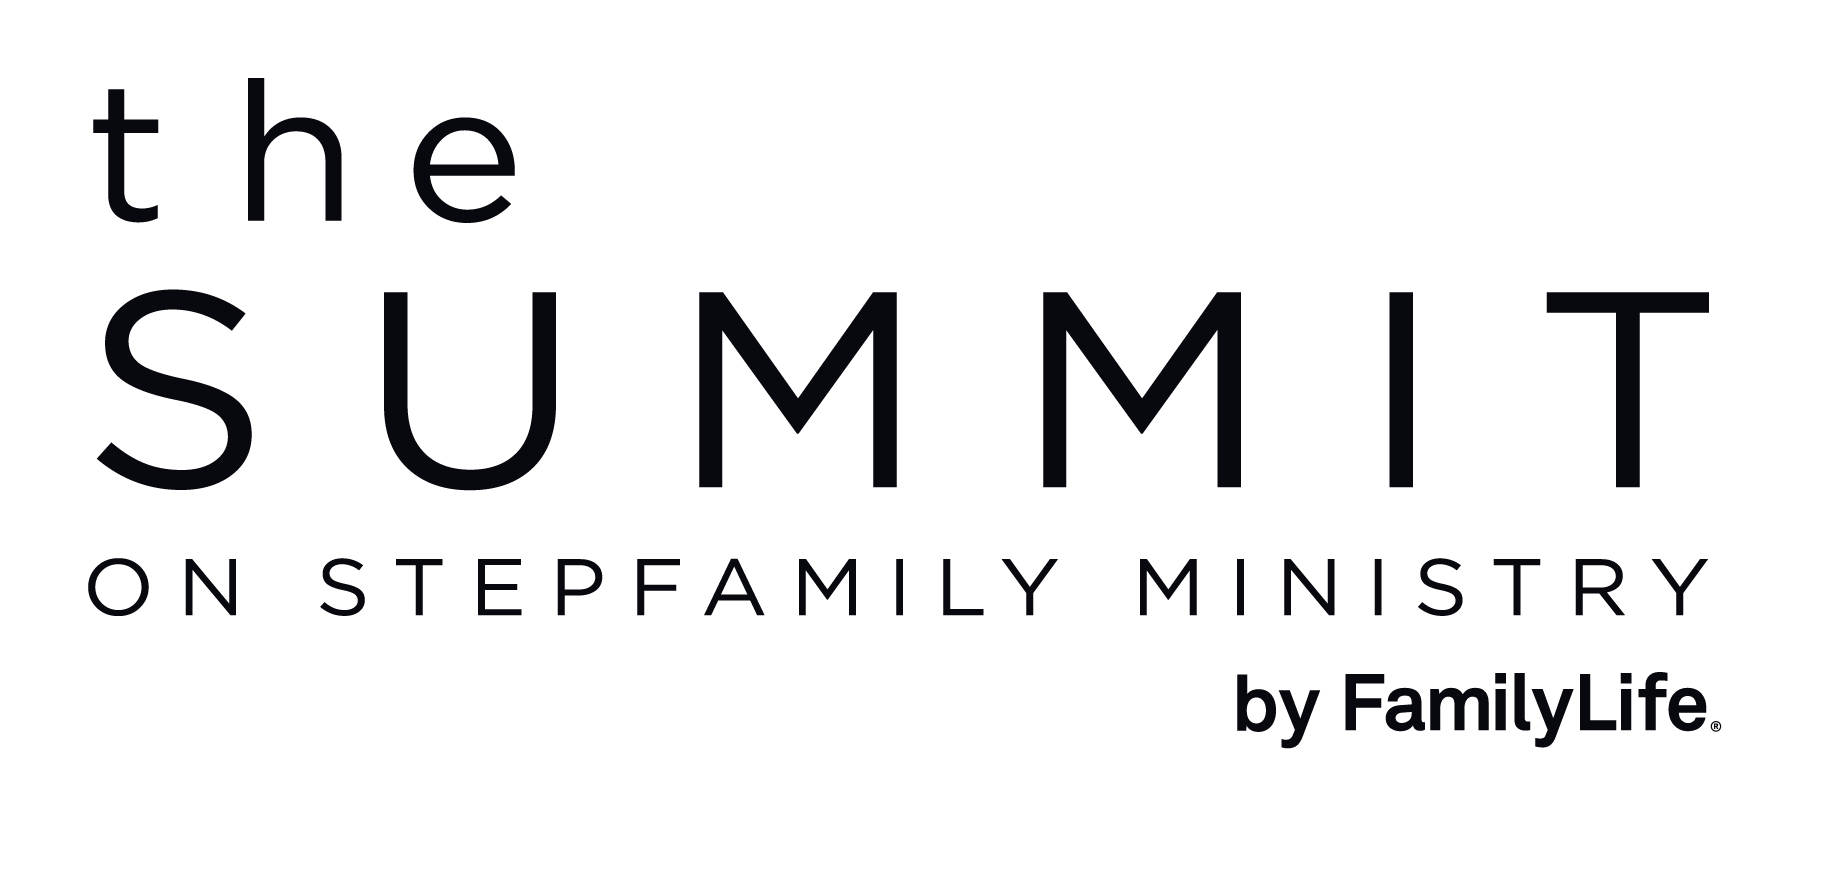 The Submit on Step Family Ministry